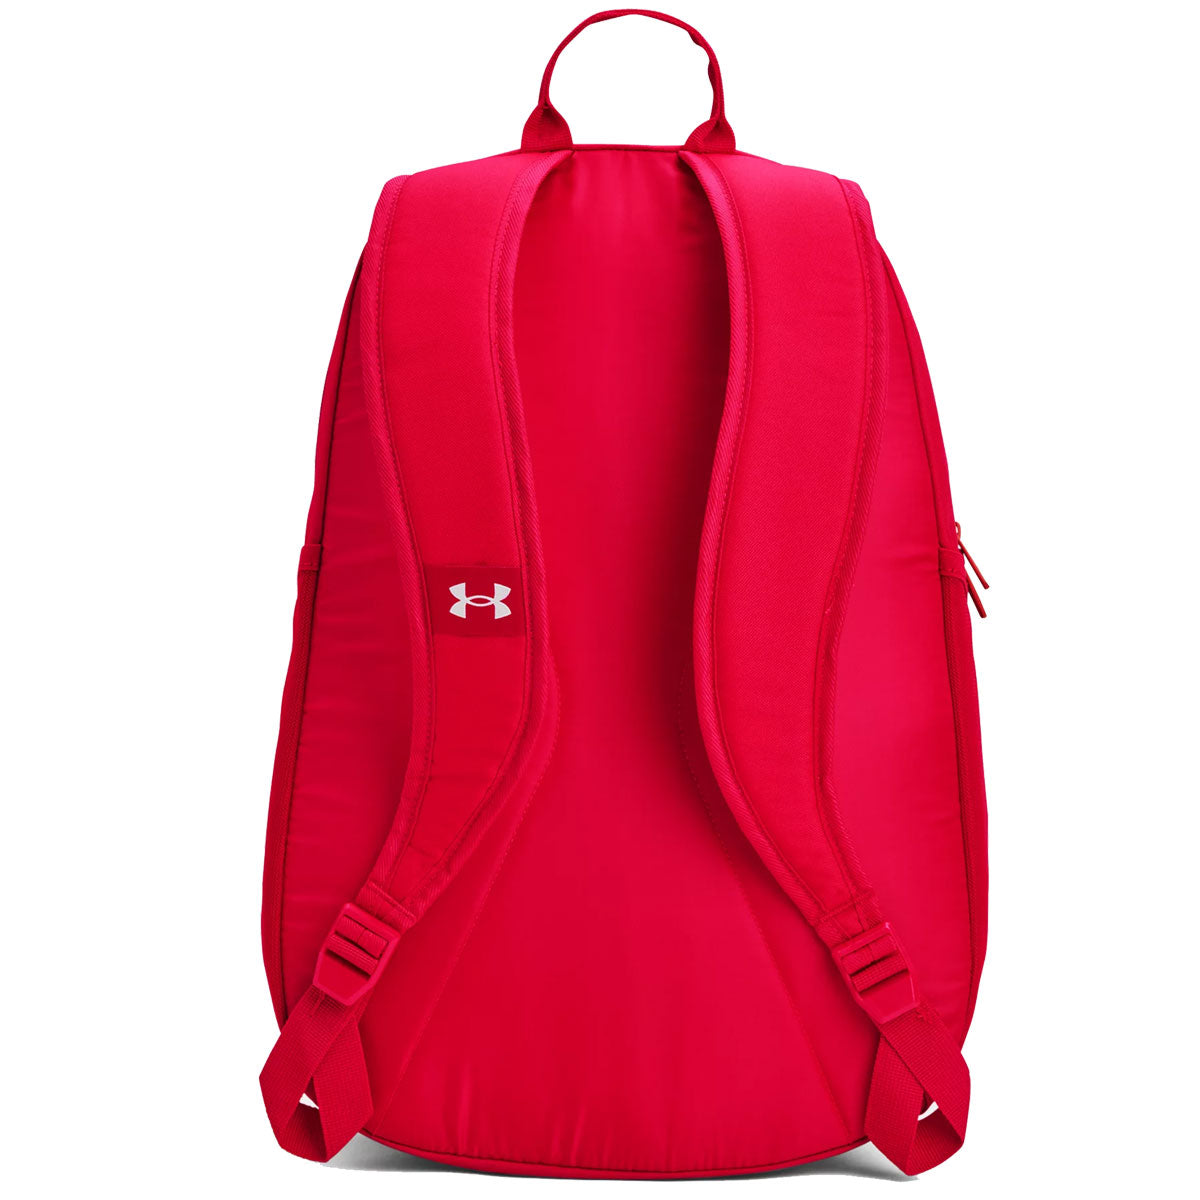 Under Armour Hustle Sport Backpack - Red/Metallic Silver